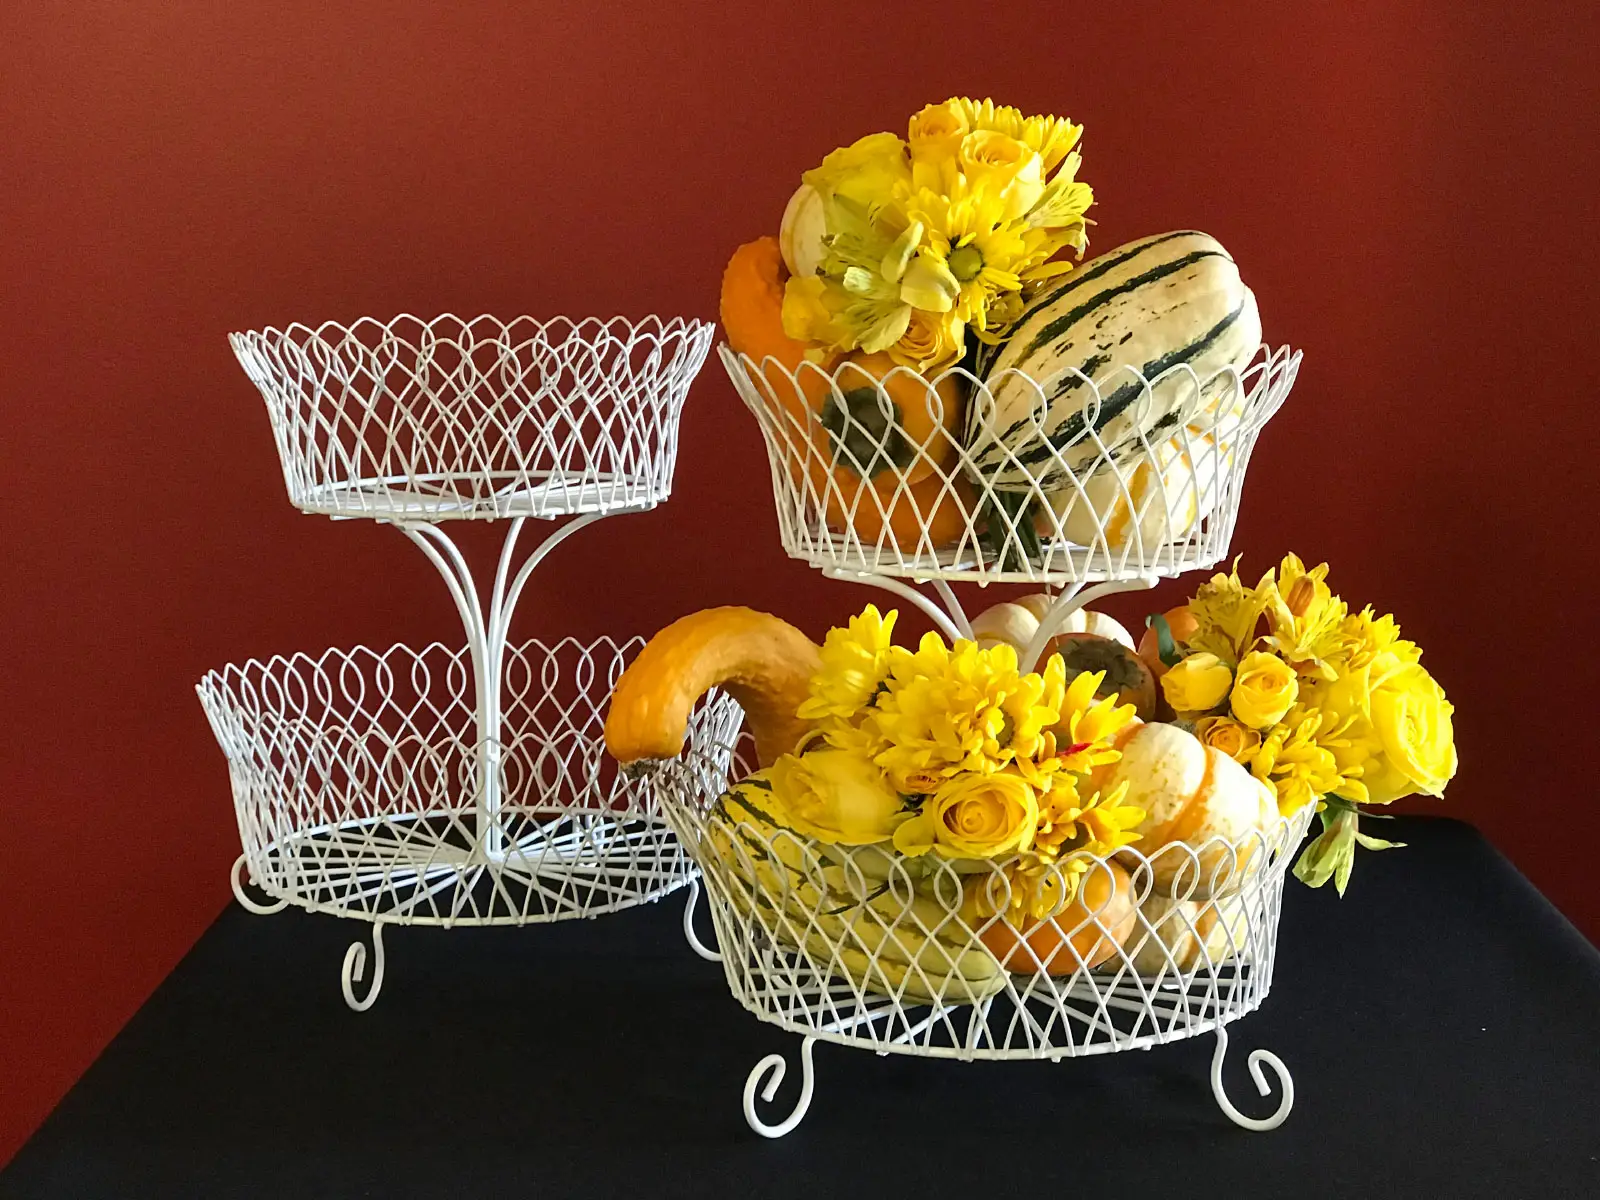 Several wax vegetable centerpieces including squash and pumpkins with flowers in white baskets